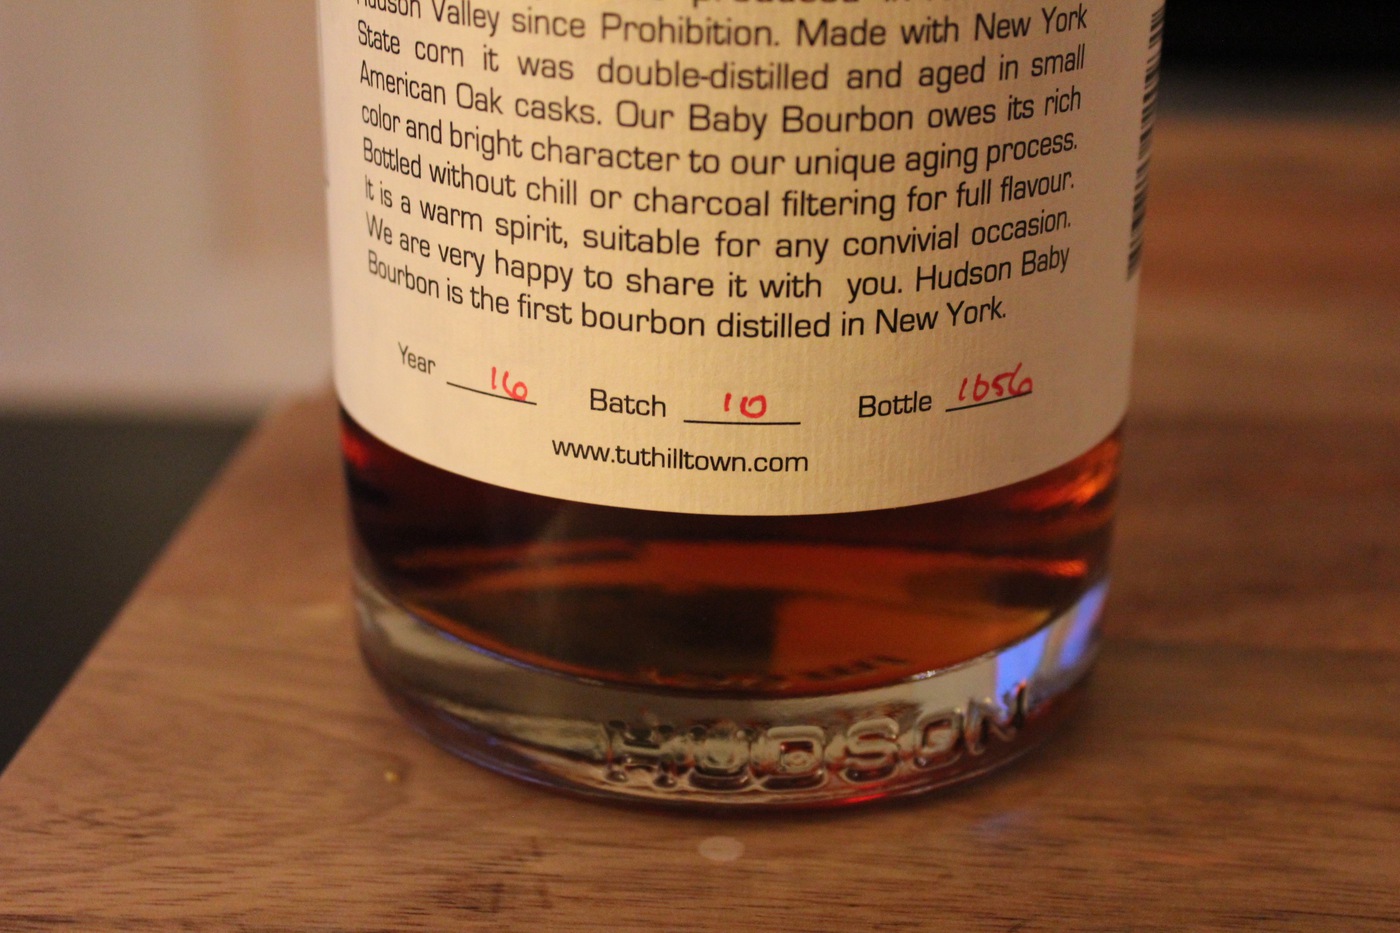 Hudson Baby Bourbon is distilled in small batches